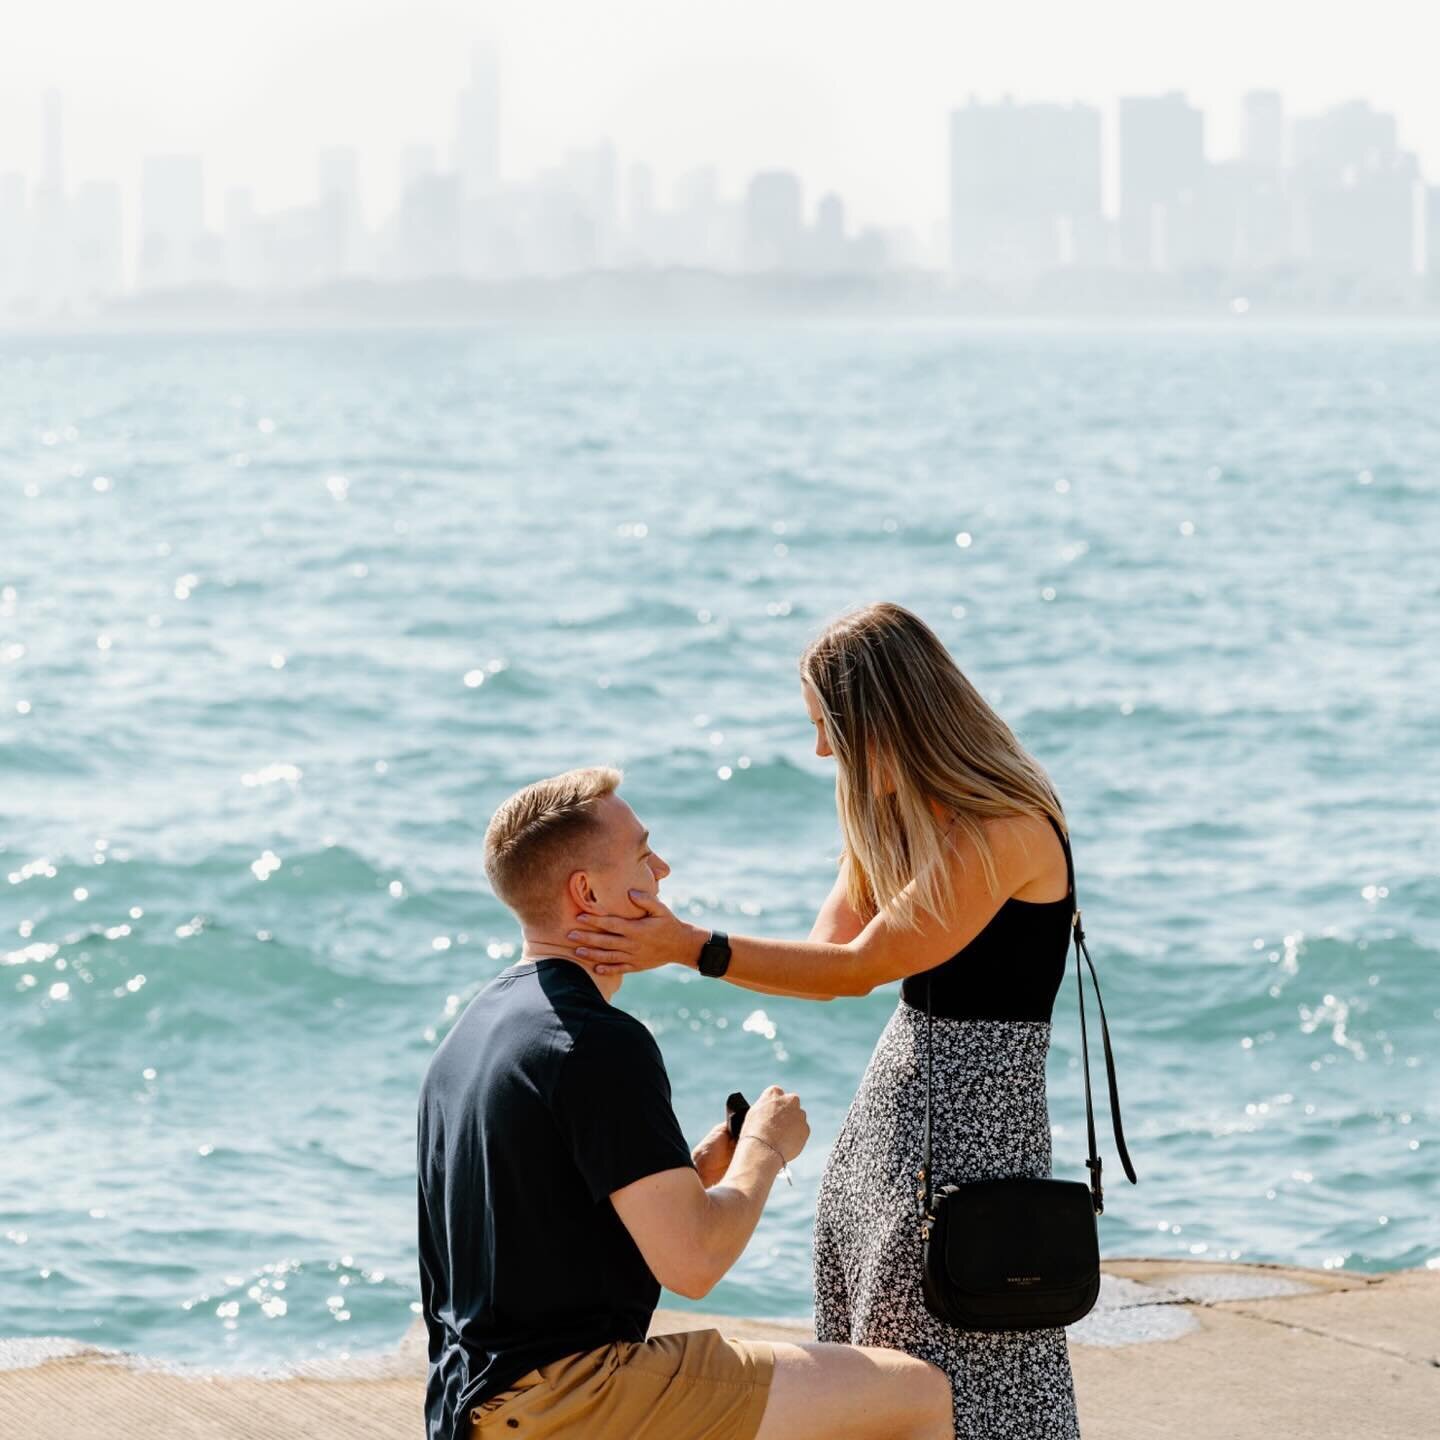 Andi + Kevin&rsquo;s proposal this morning was so incredibly wholesome. Kevin reached out literally months ago with this planned to the T so when the moment finally came, so so happy we got a glimmer of the skyline to capture his full vision. Documen